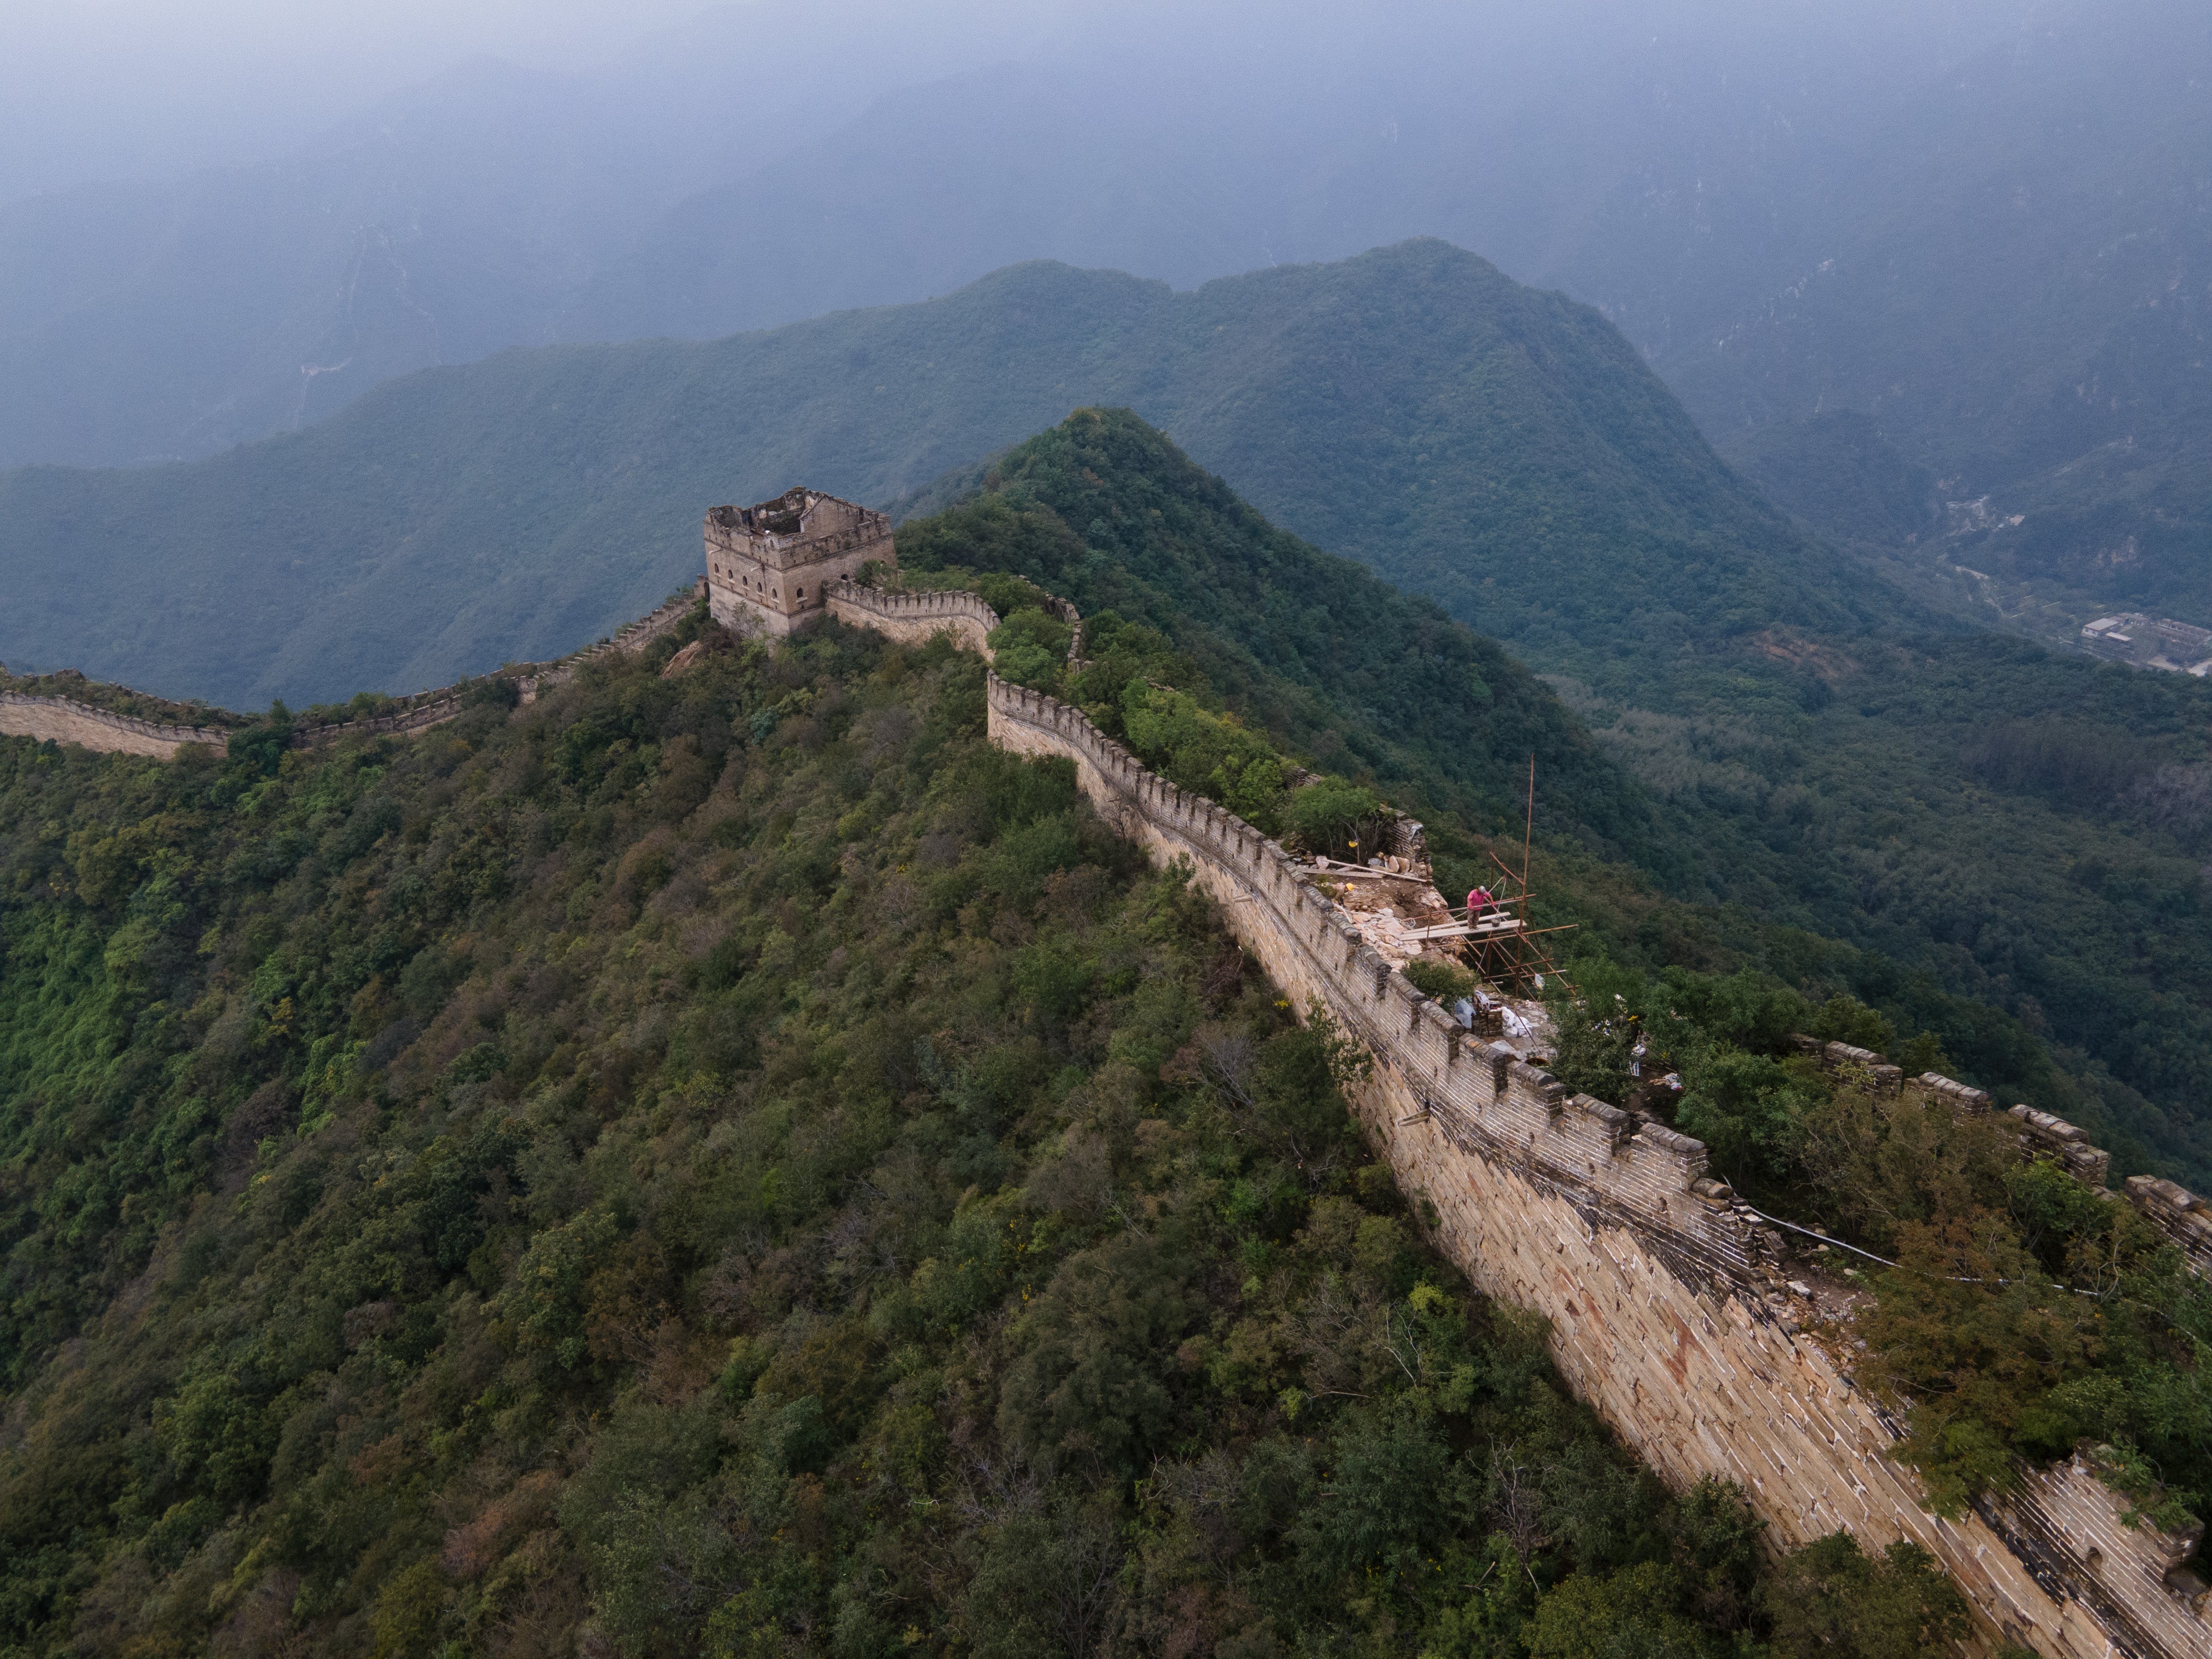 A section of the Great Wall is being repaired in Huairou district, Beijing, in 2021